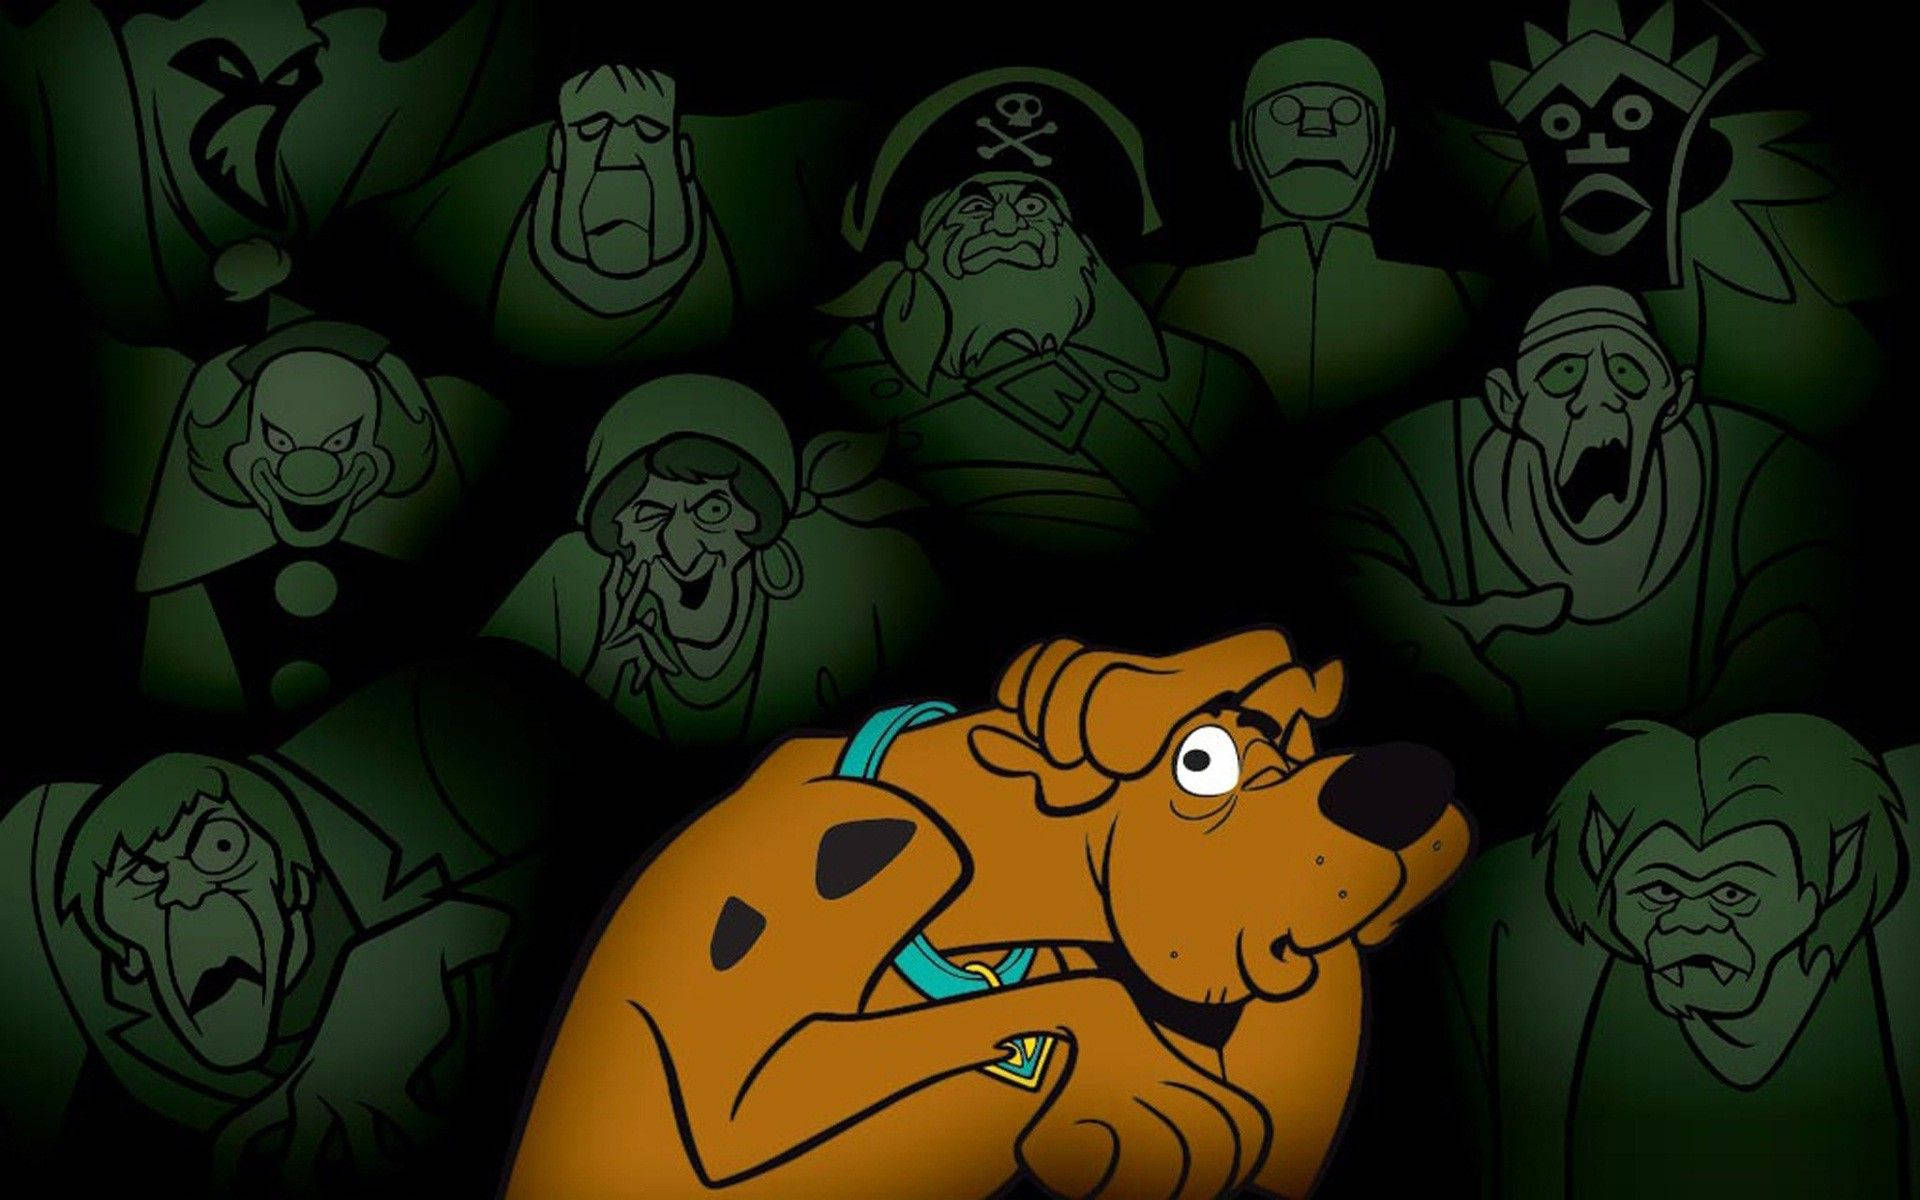 Anxious Face of Scooby Doo Wallpaper